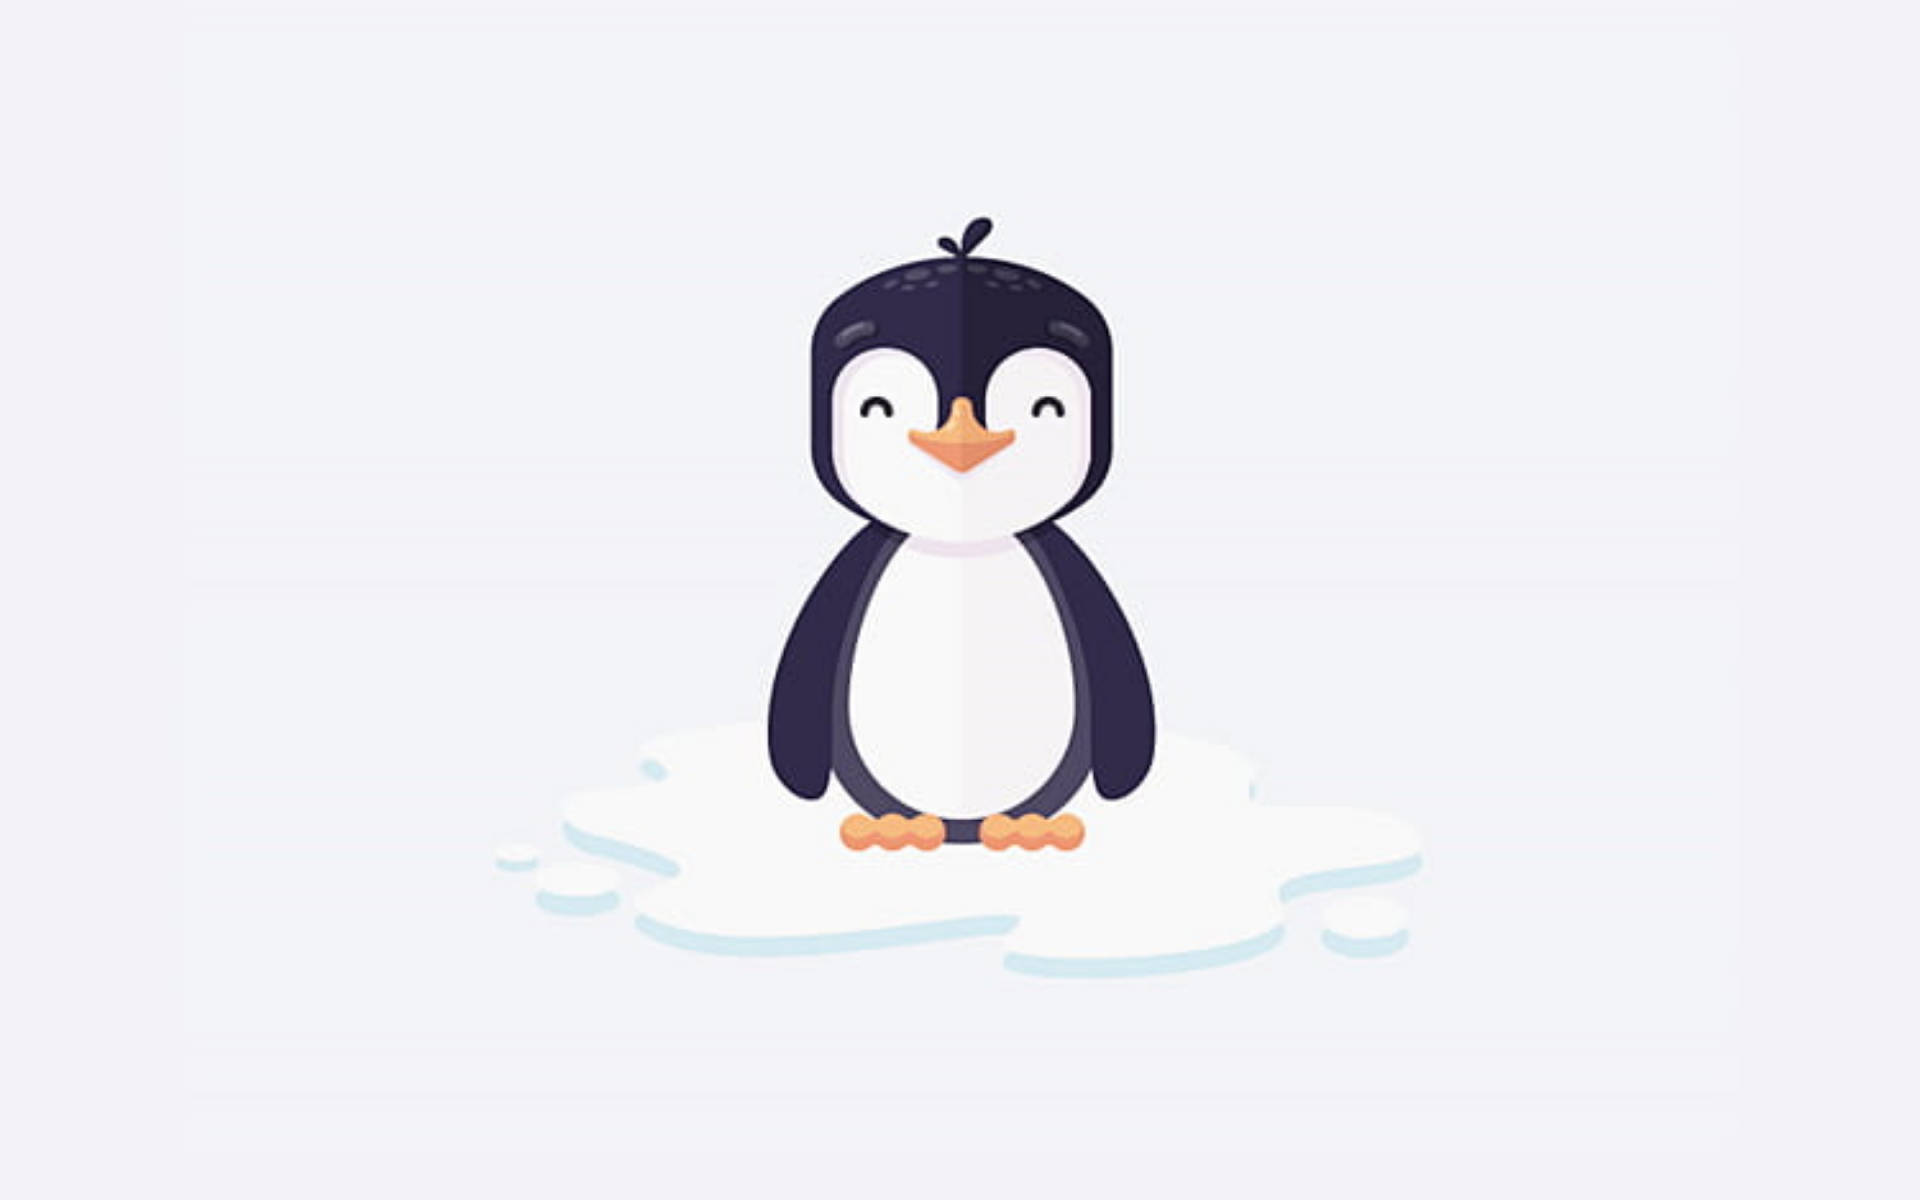 Graphic Penguin On White Screen Background